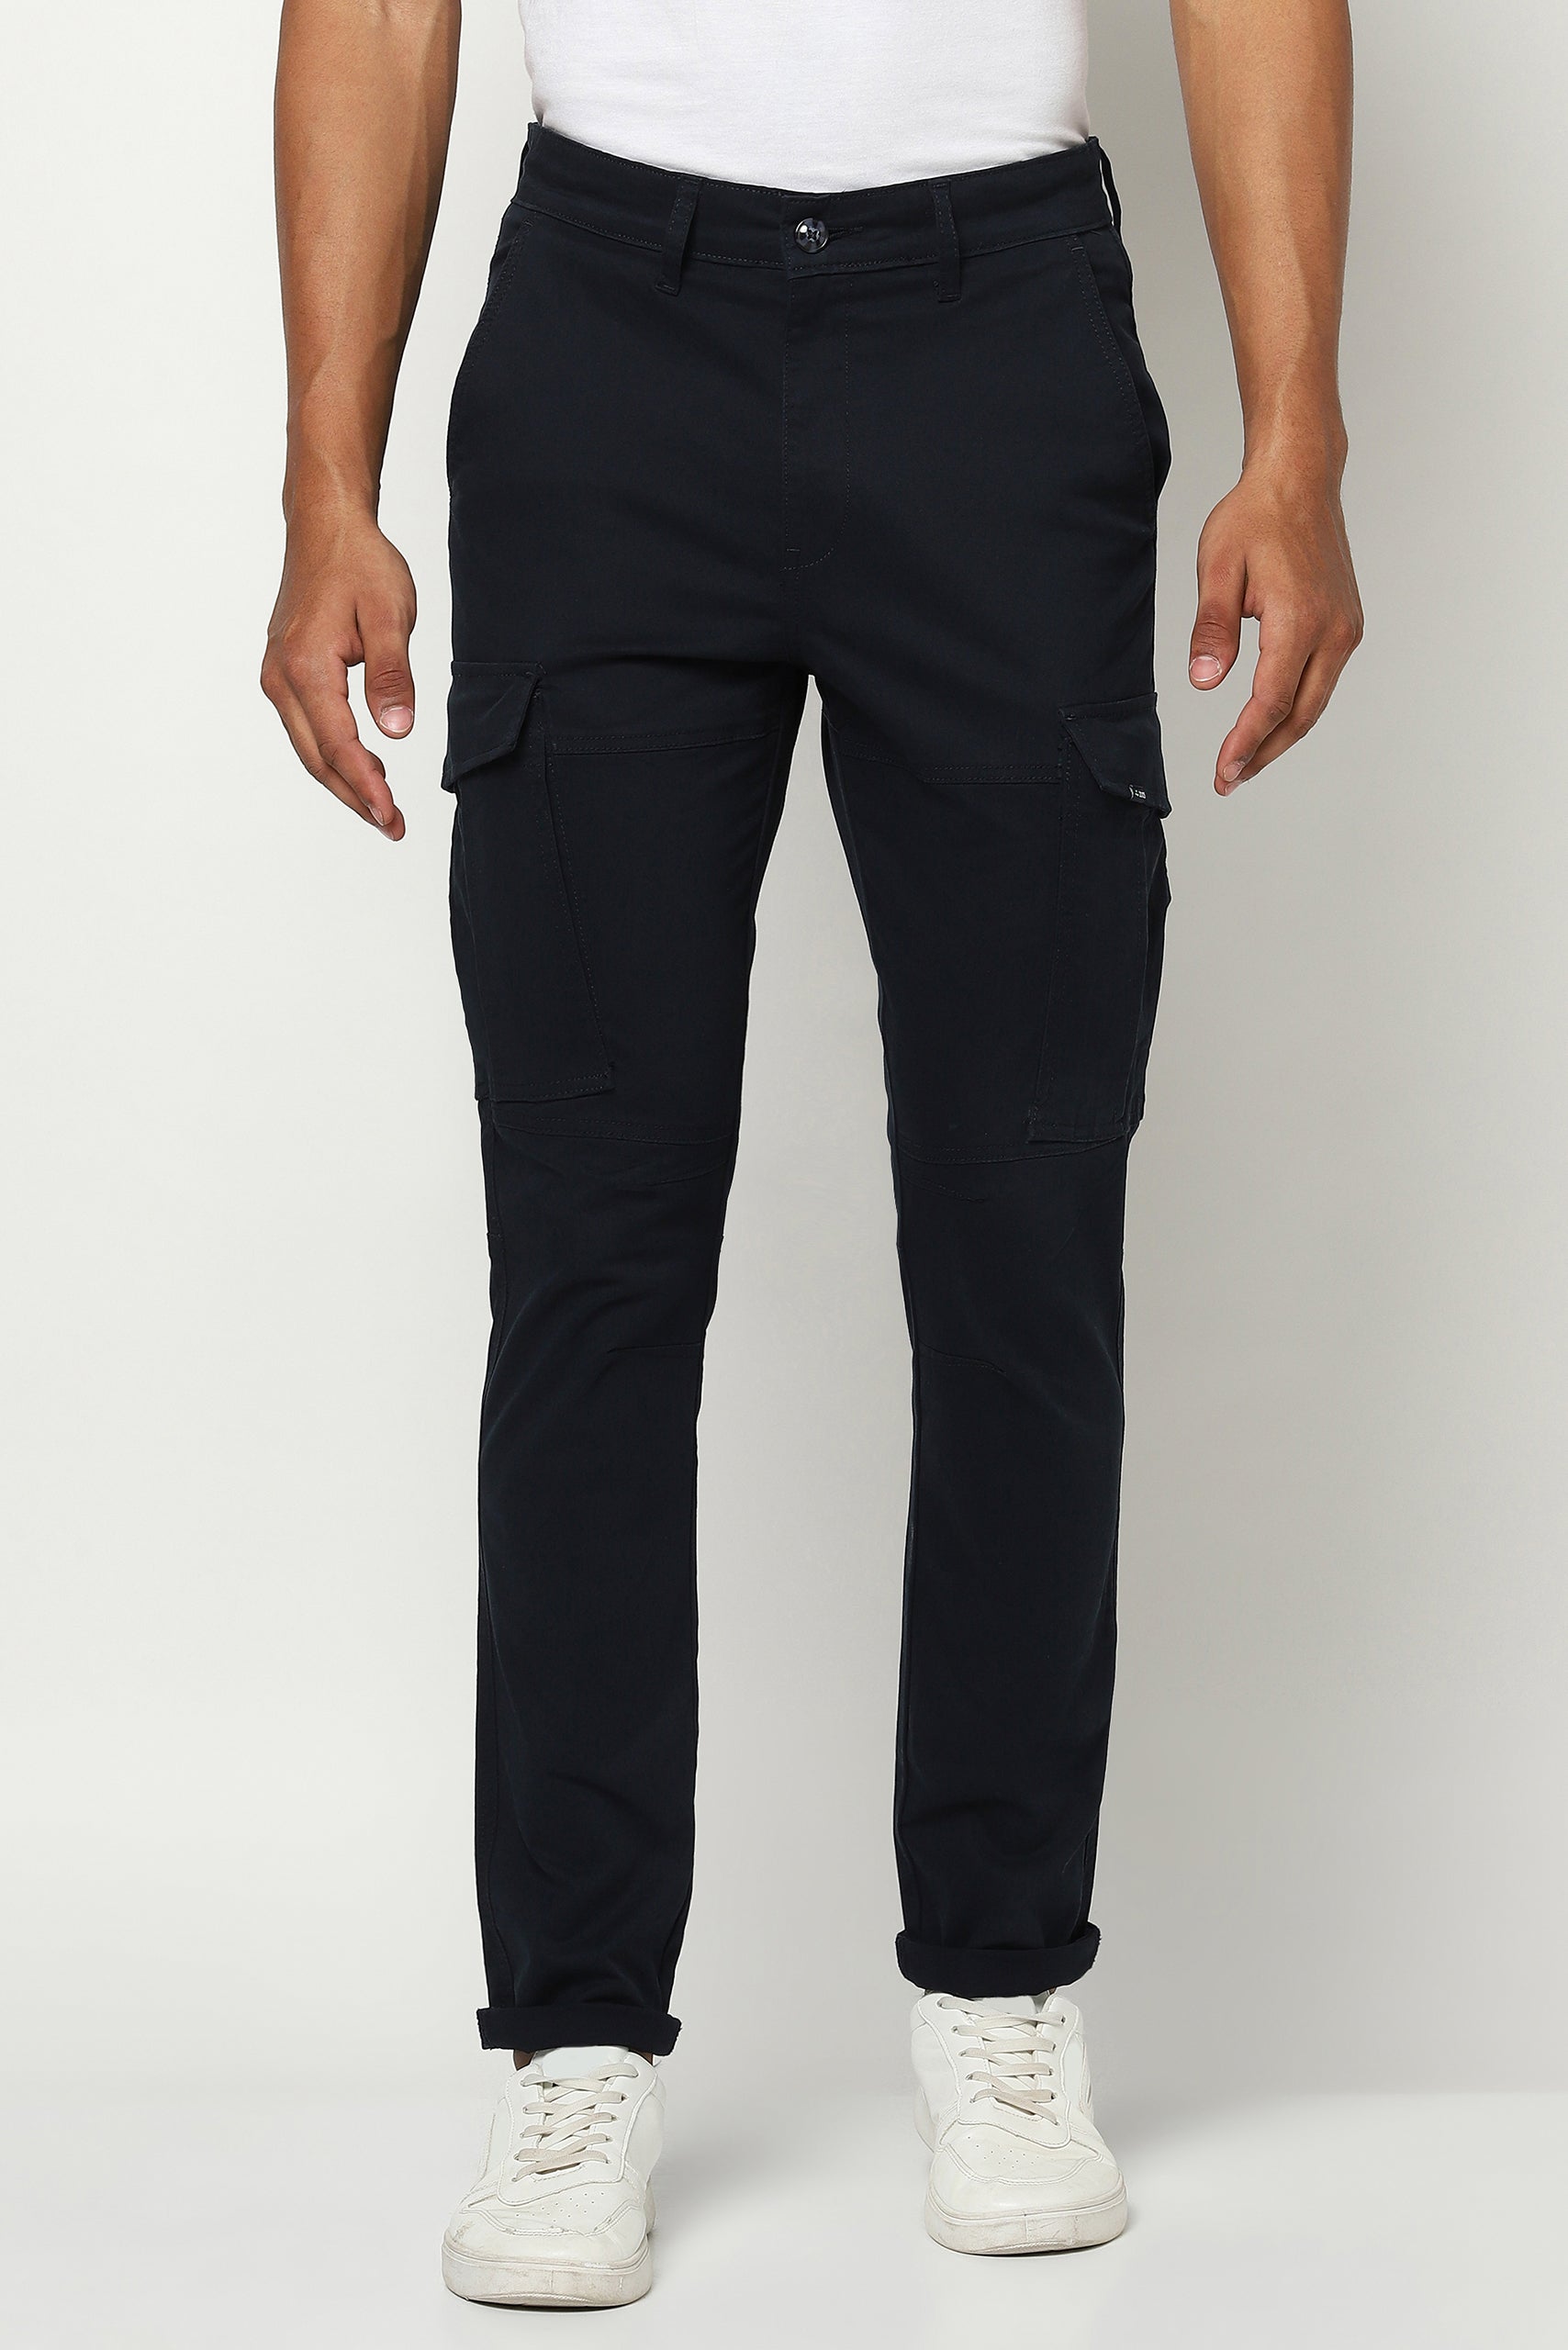 Navy Blue Cargo Trousers  Buy Navy Blue Cargo Trousers online in India